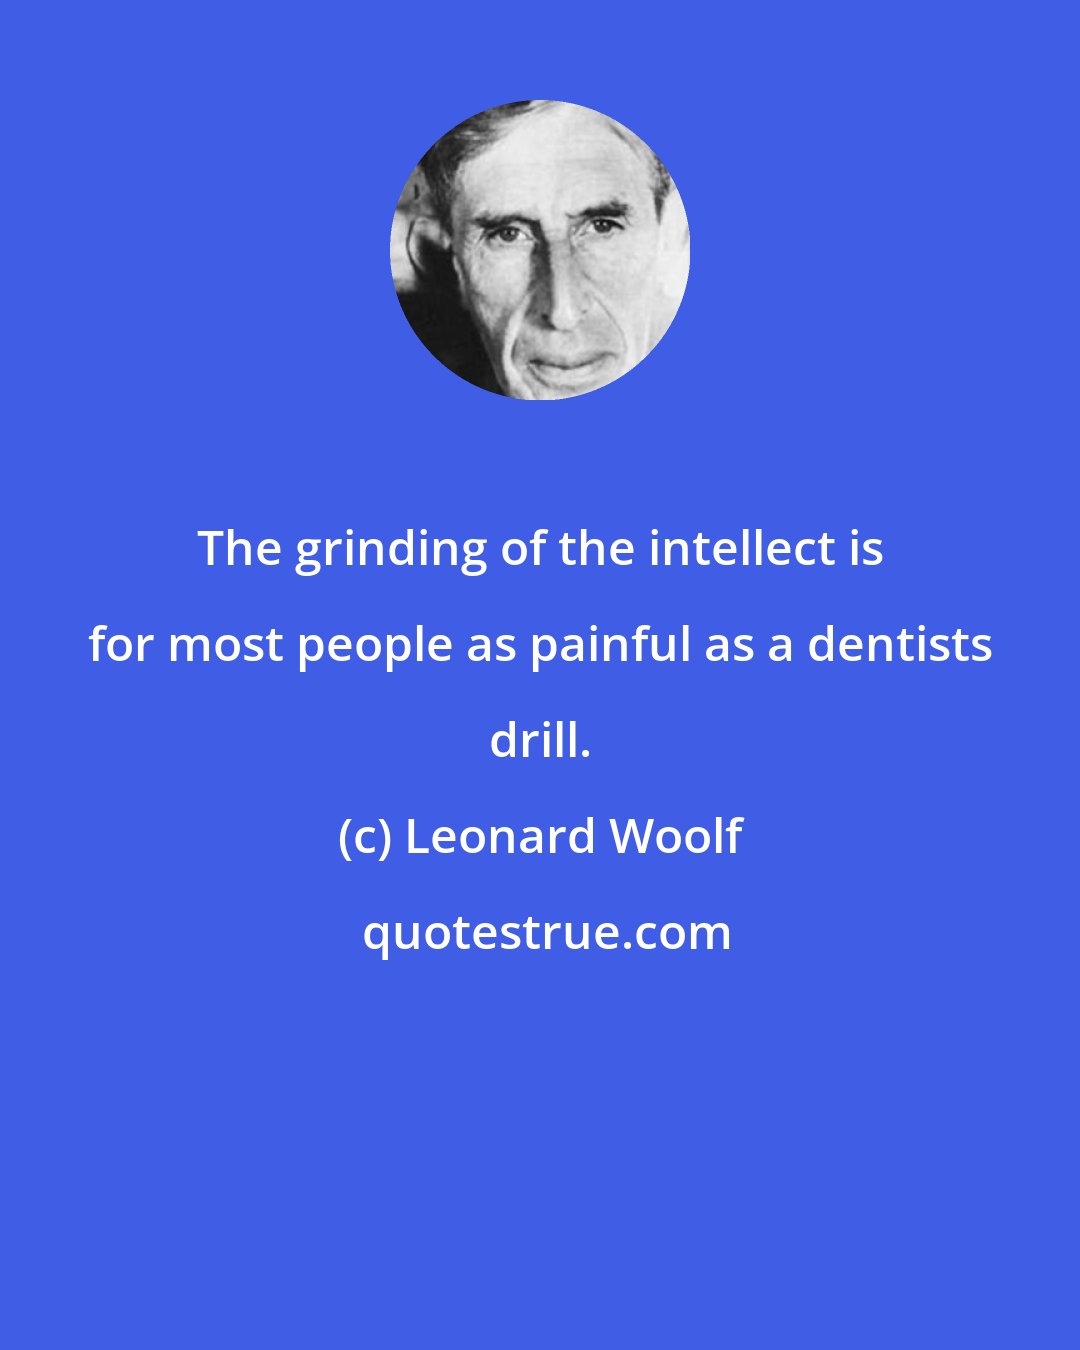 Leonard Woolf: The grinding of the intellect is for most people as painful as a dentists drill.